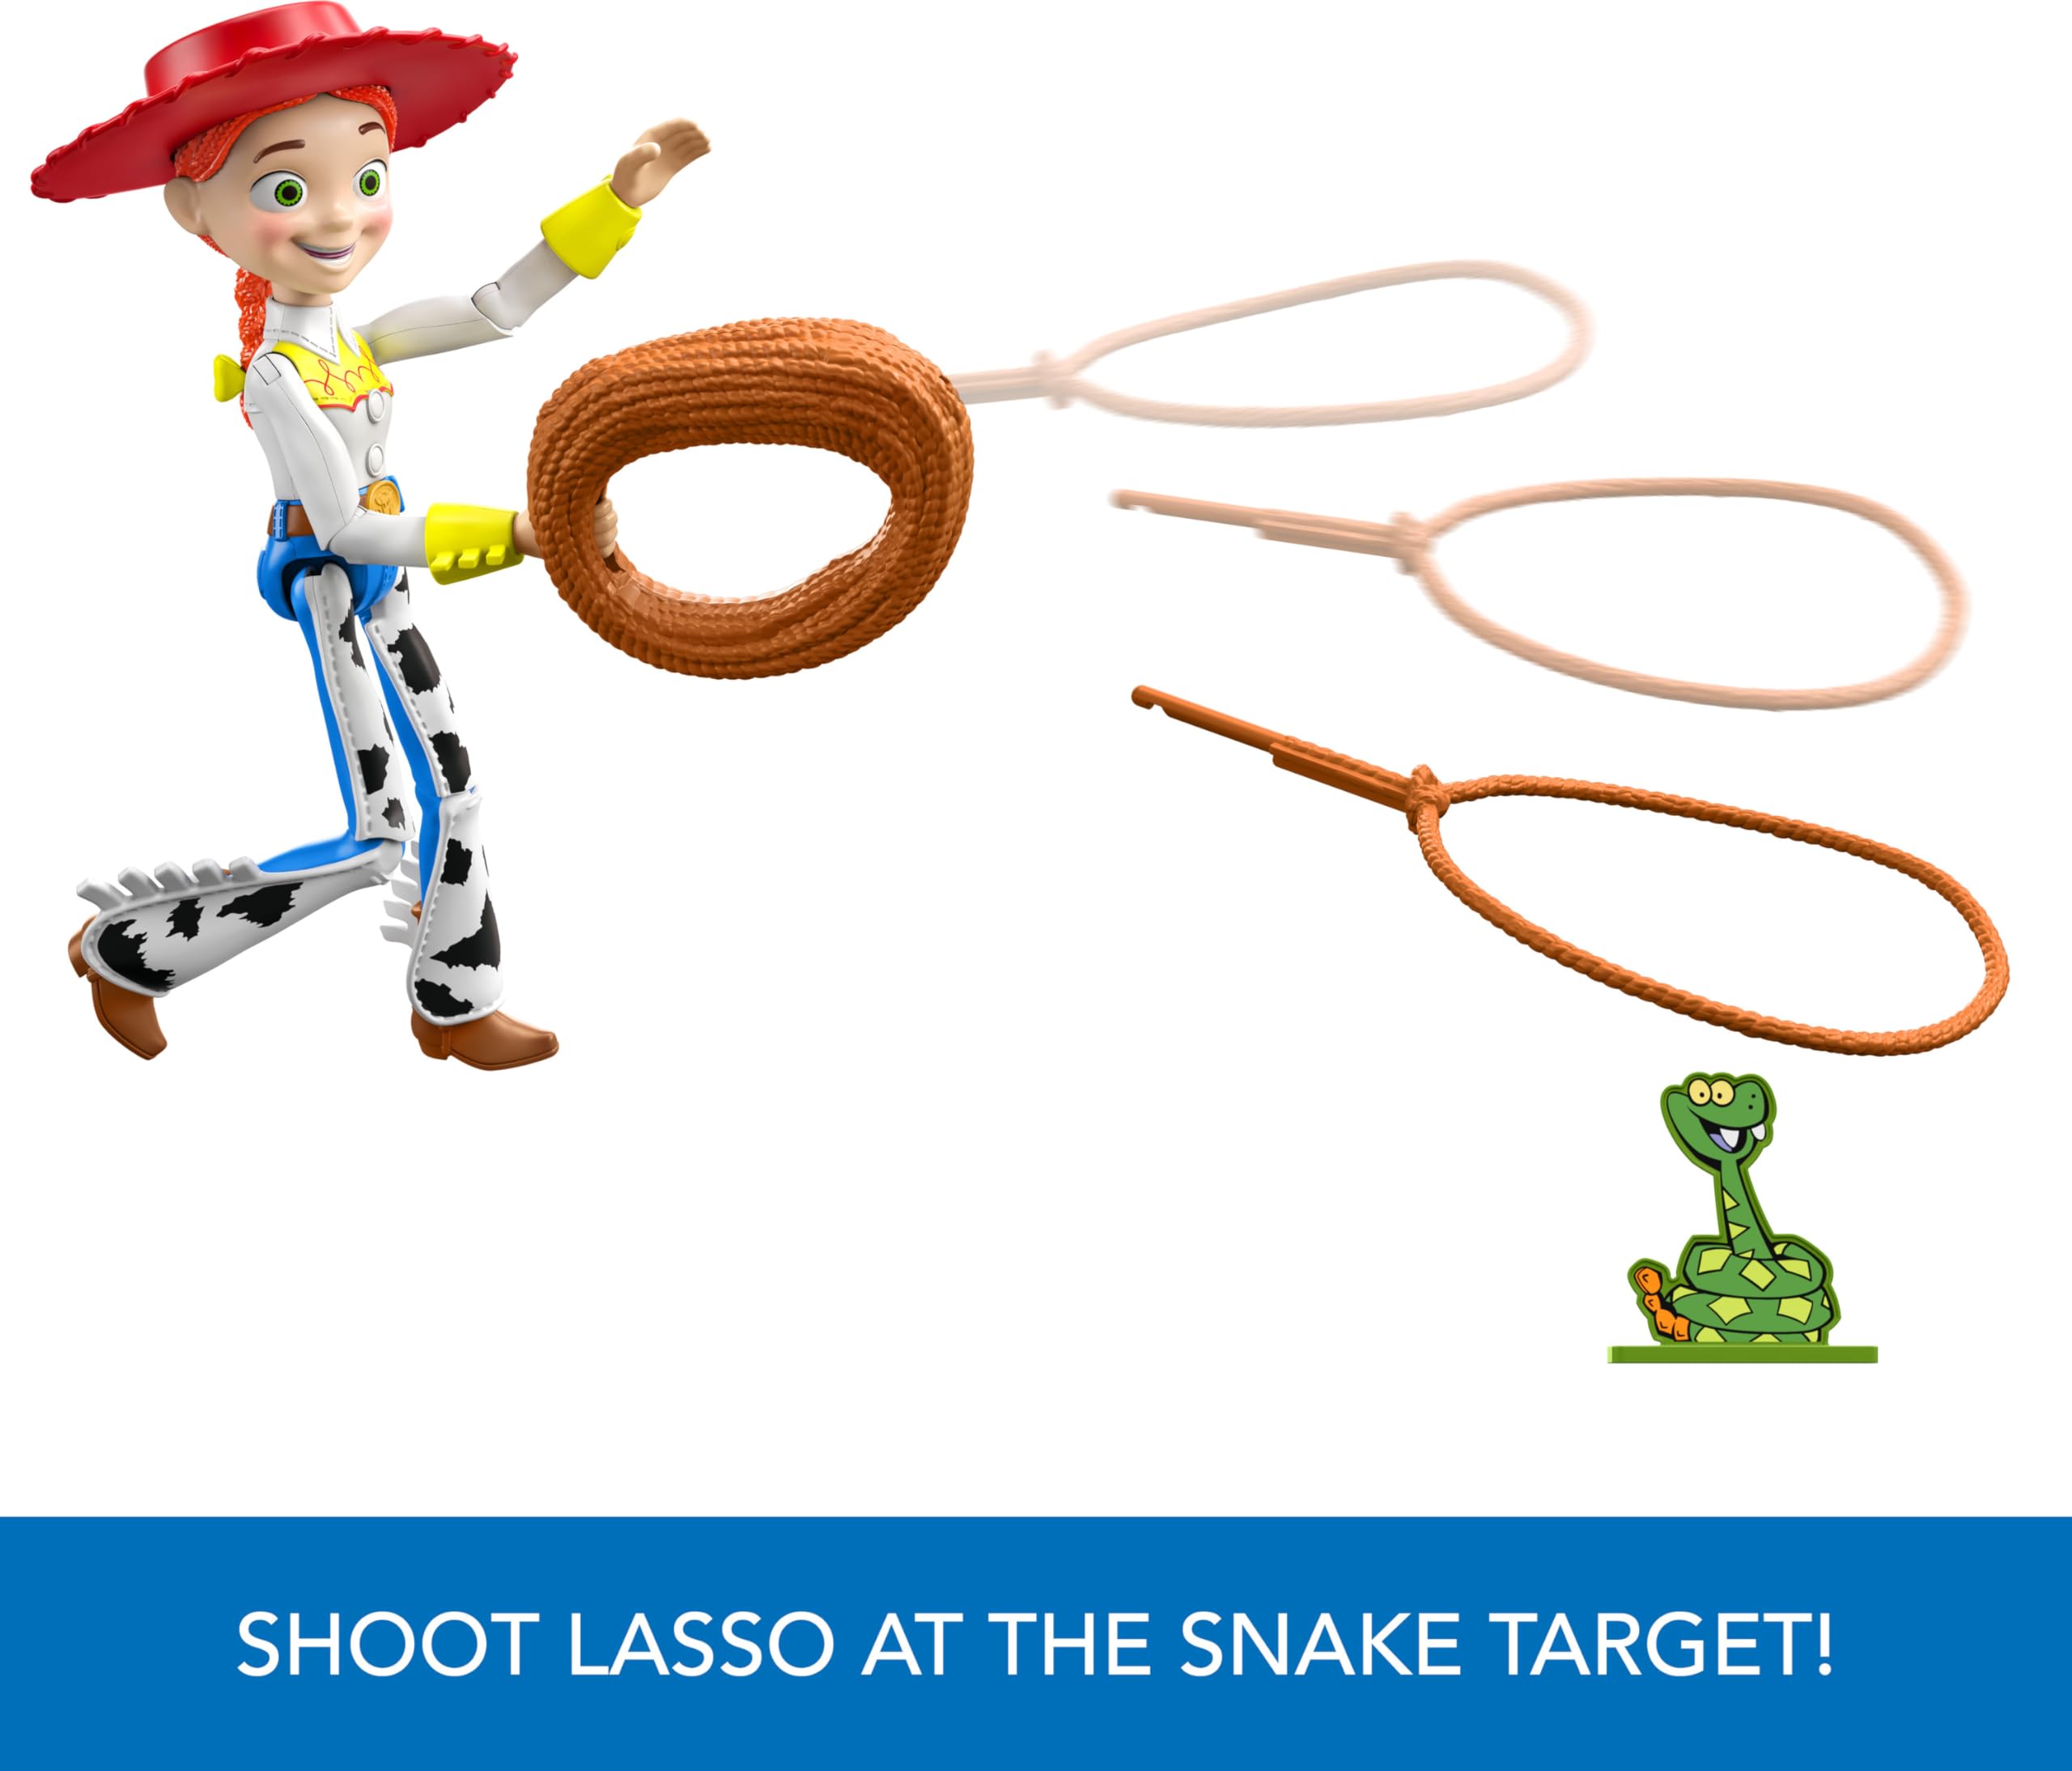 Mattel Disney Pixar Toy Story 12-inch Lasso Jessie Posable Action Figure, Lasso Accessory with Roping Action Doubles as Role Play Accessory